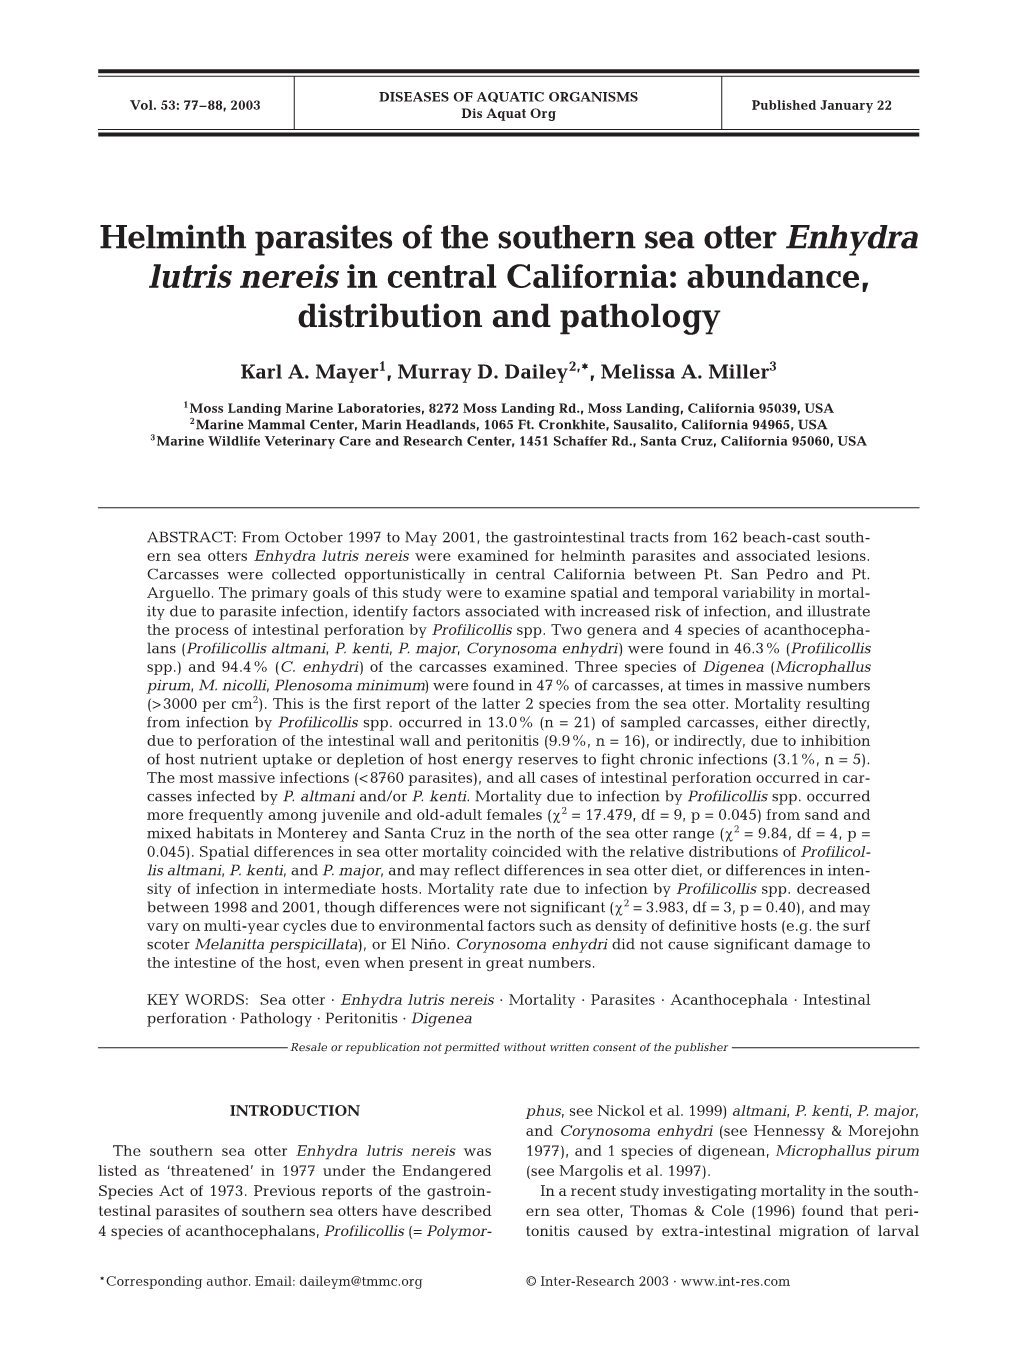 Helminth Parasites of the Southern Sea Otter Enhydra Lutris Nereis in Central California: Abundance, Distribution and Pathology